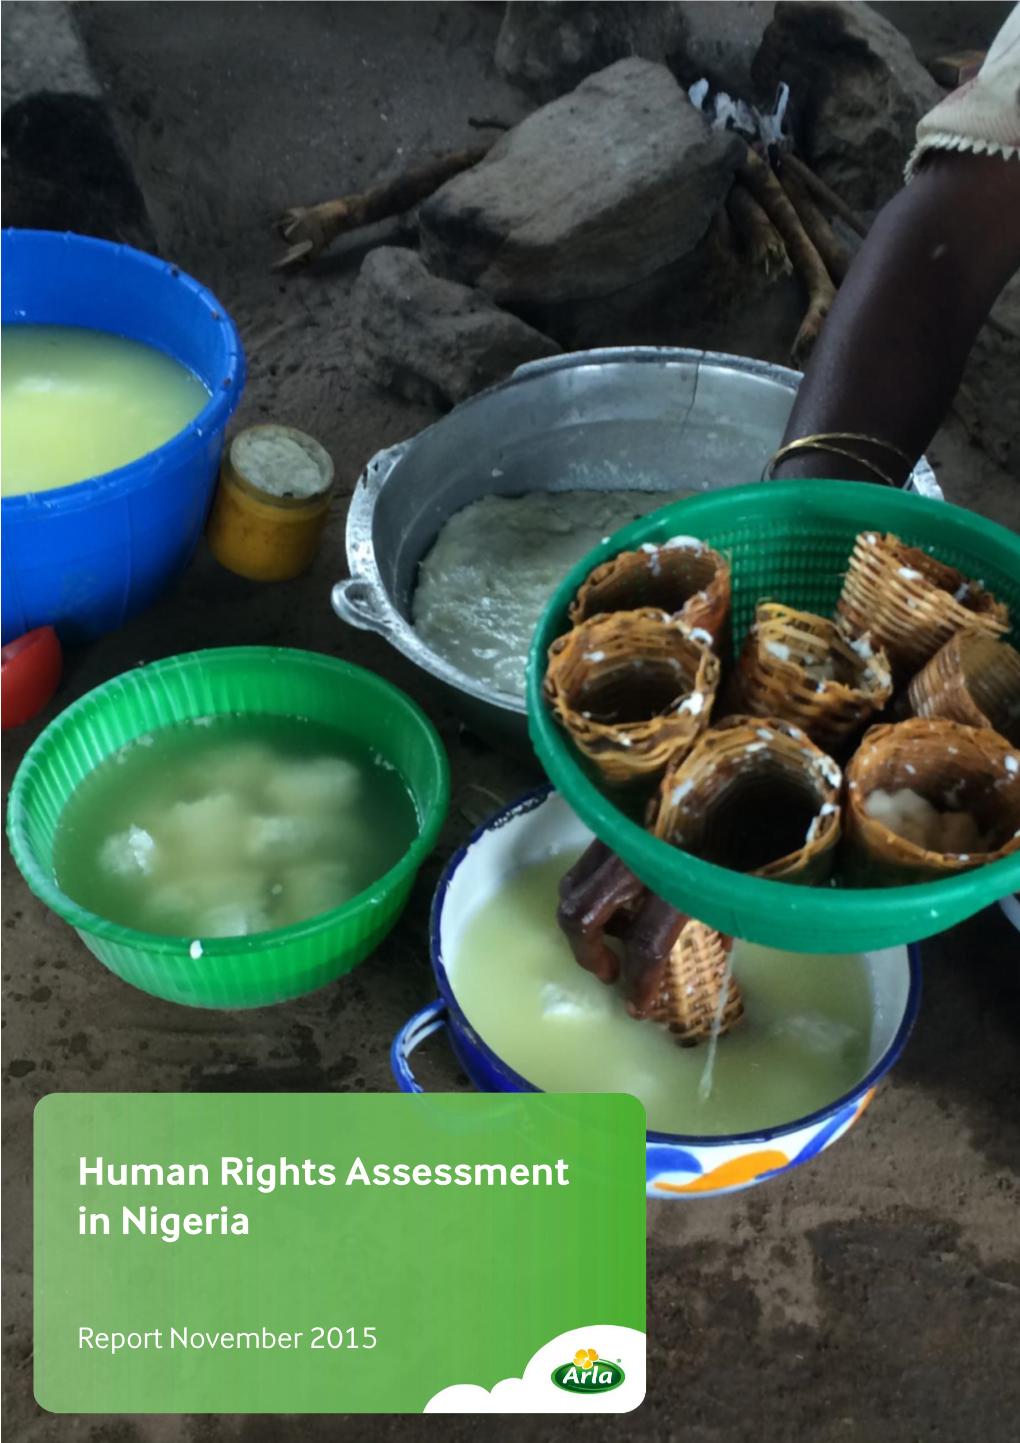 Human Rights Assessment in Nigeria